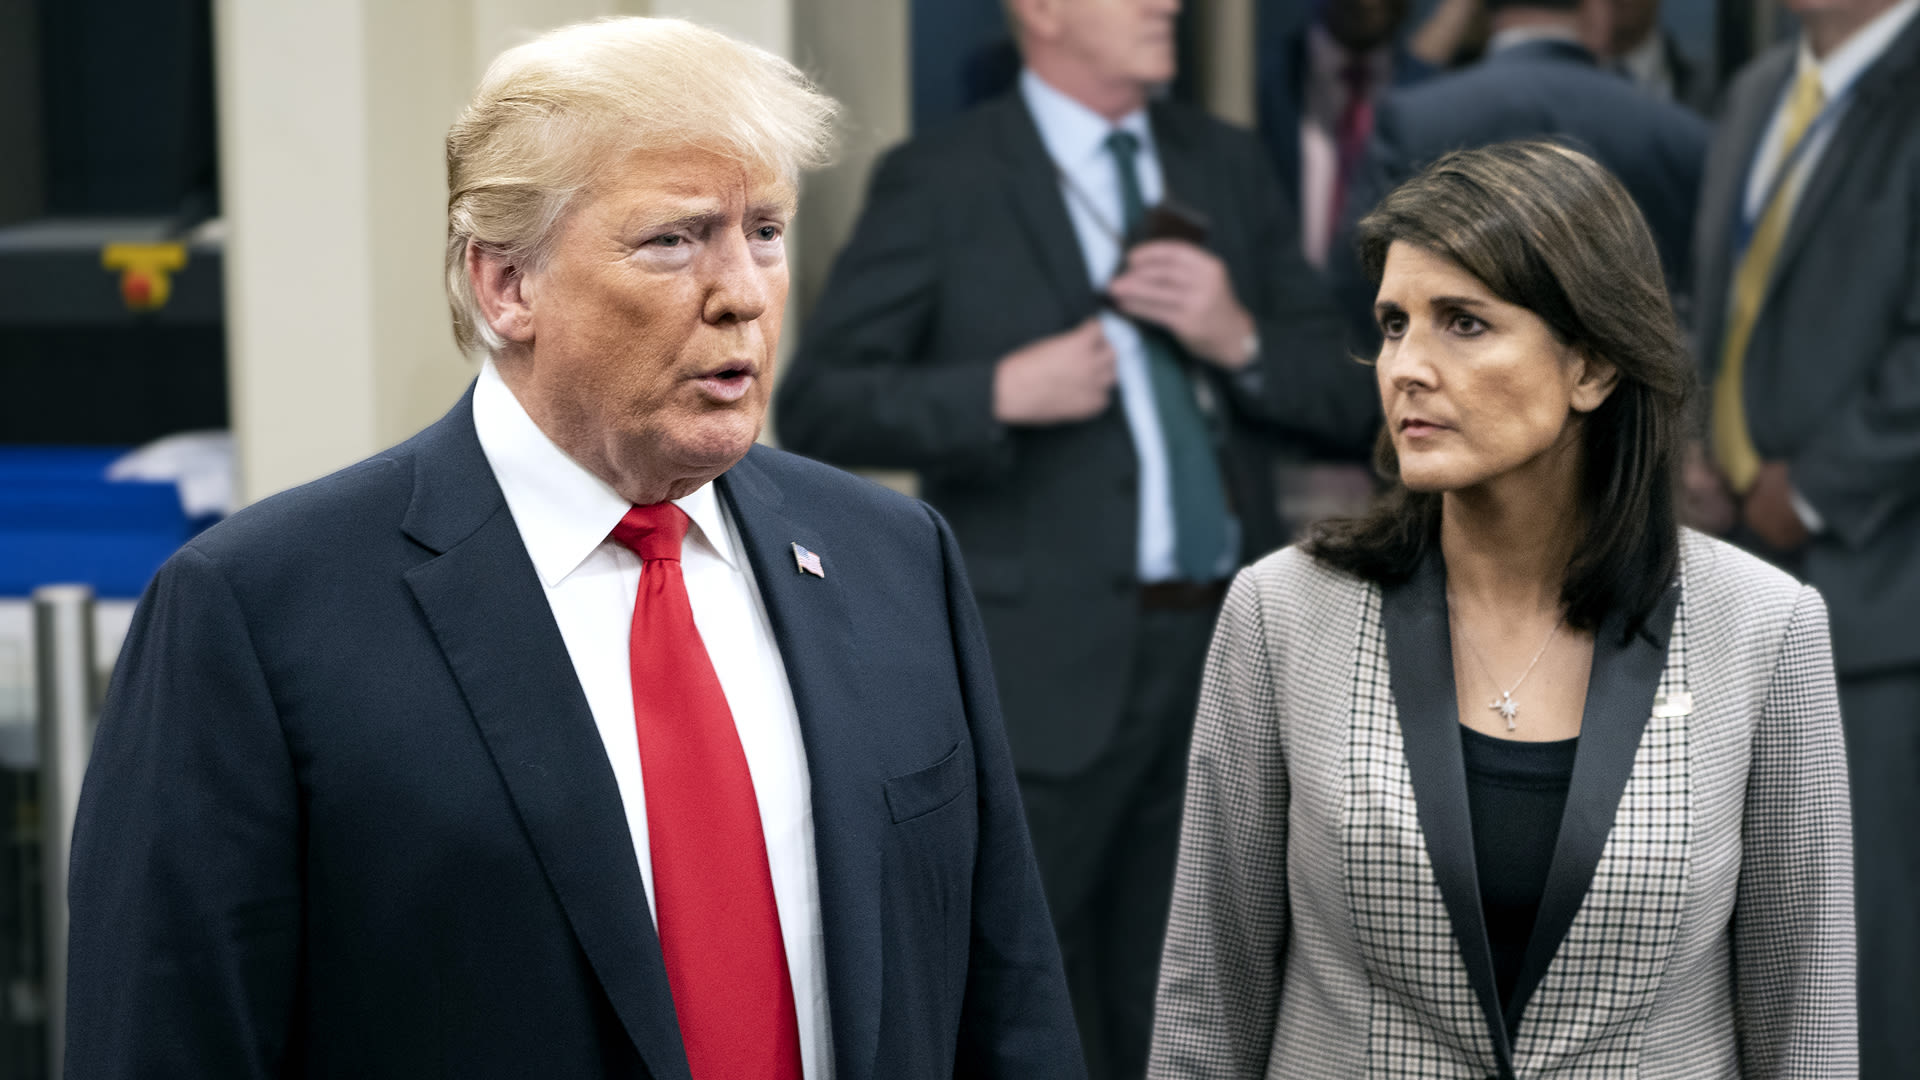 Nikki Haley’s Words About Trump ‘Criminal’ Come Back to Bite Her After His Felony Conviction